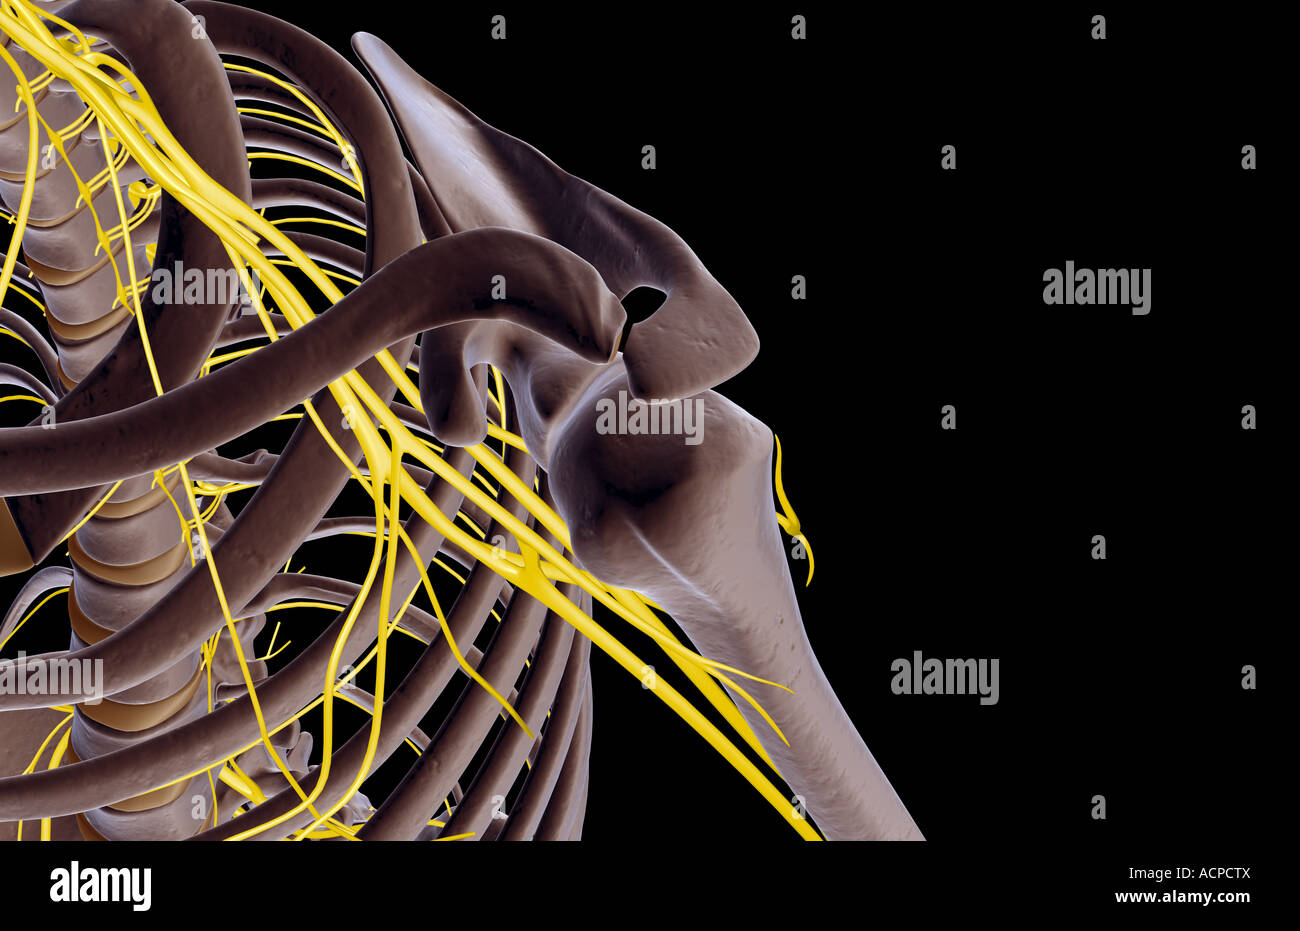 Axillary Nerve Shoulder High Resolution Stock Photography and Images